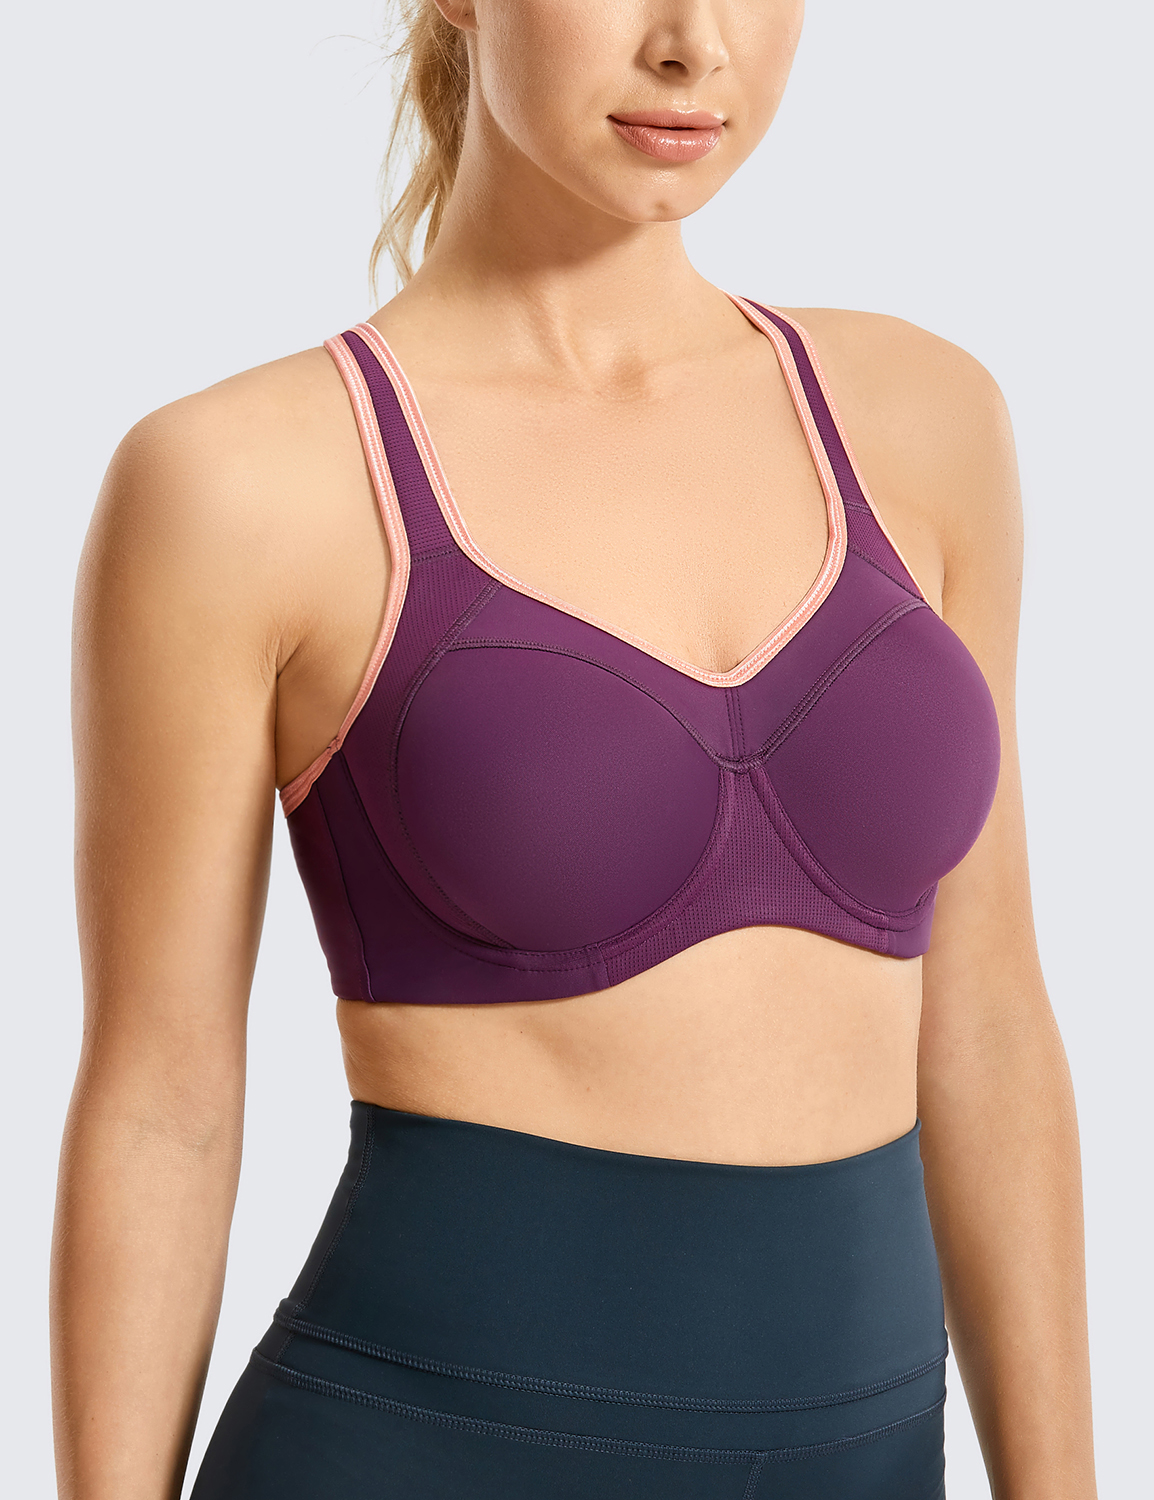 thumbnail 19 - SYROKAN Women&#039;s Underwire Sports Bra Support High Impact Racerback Lightly Lined